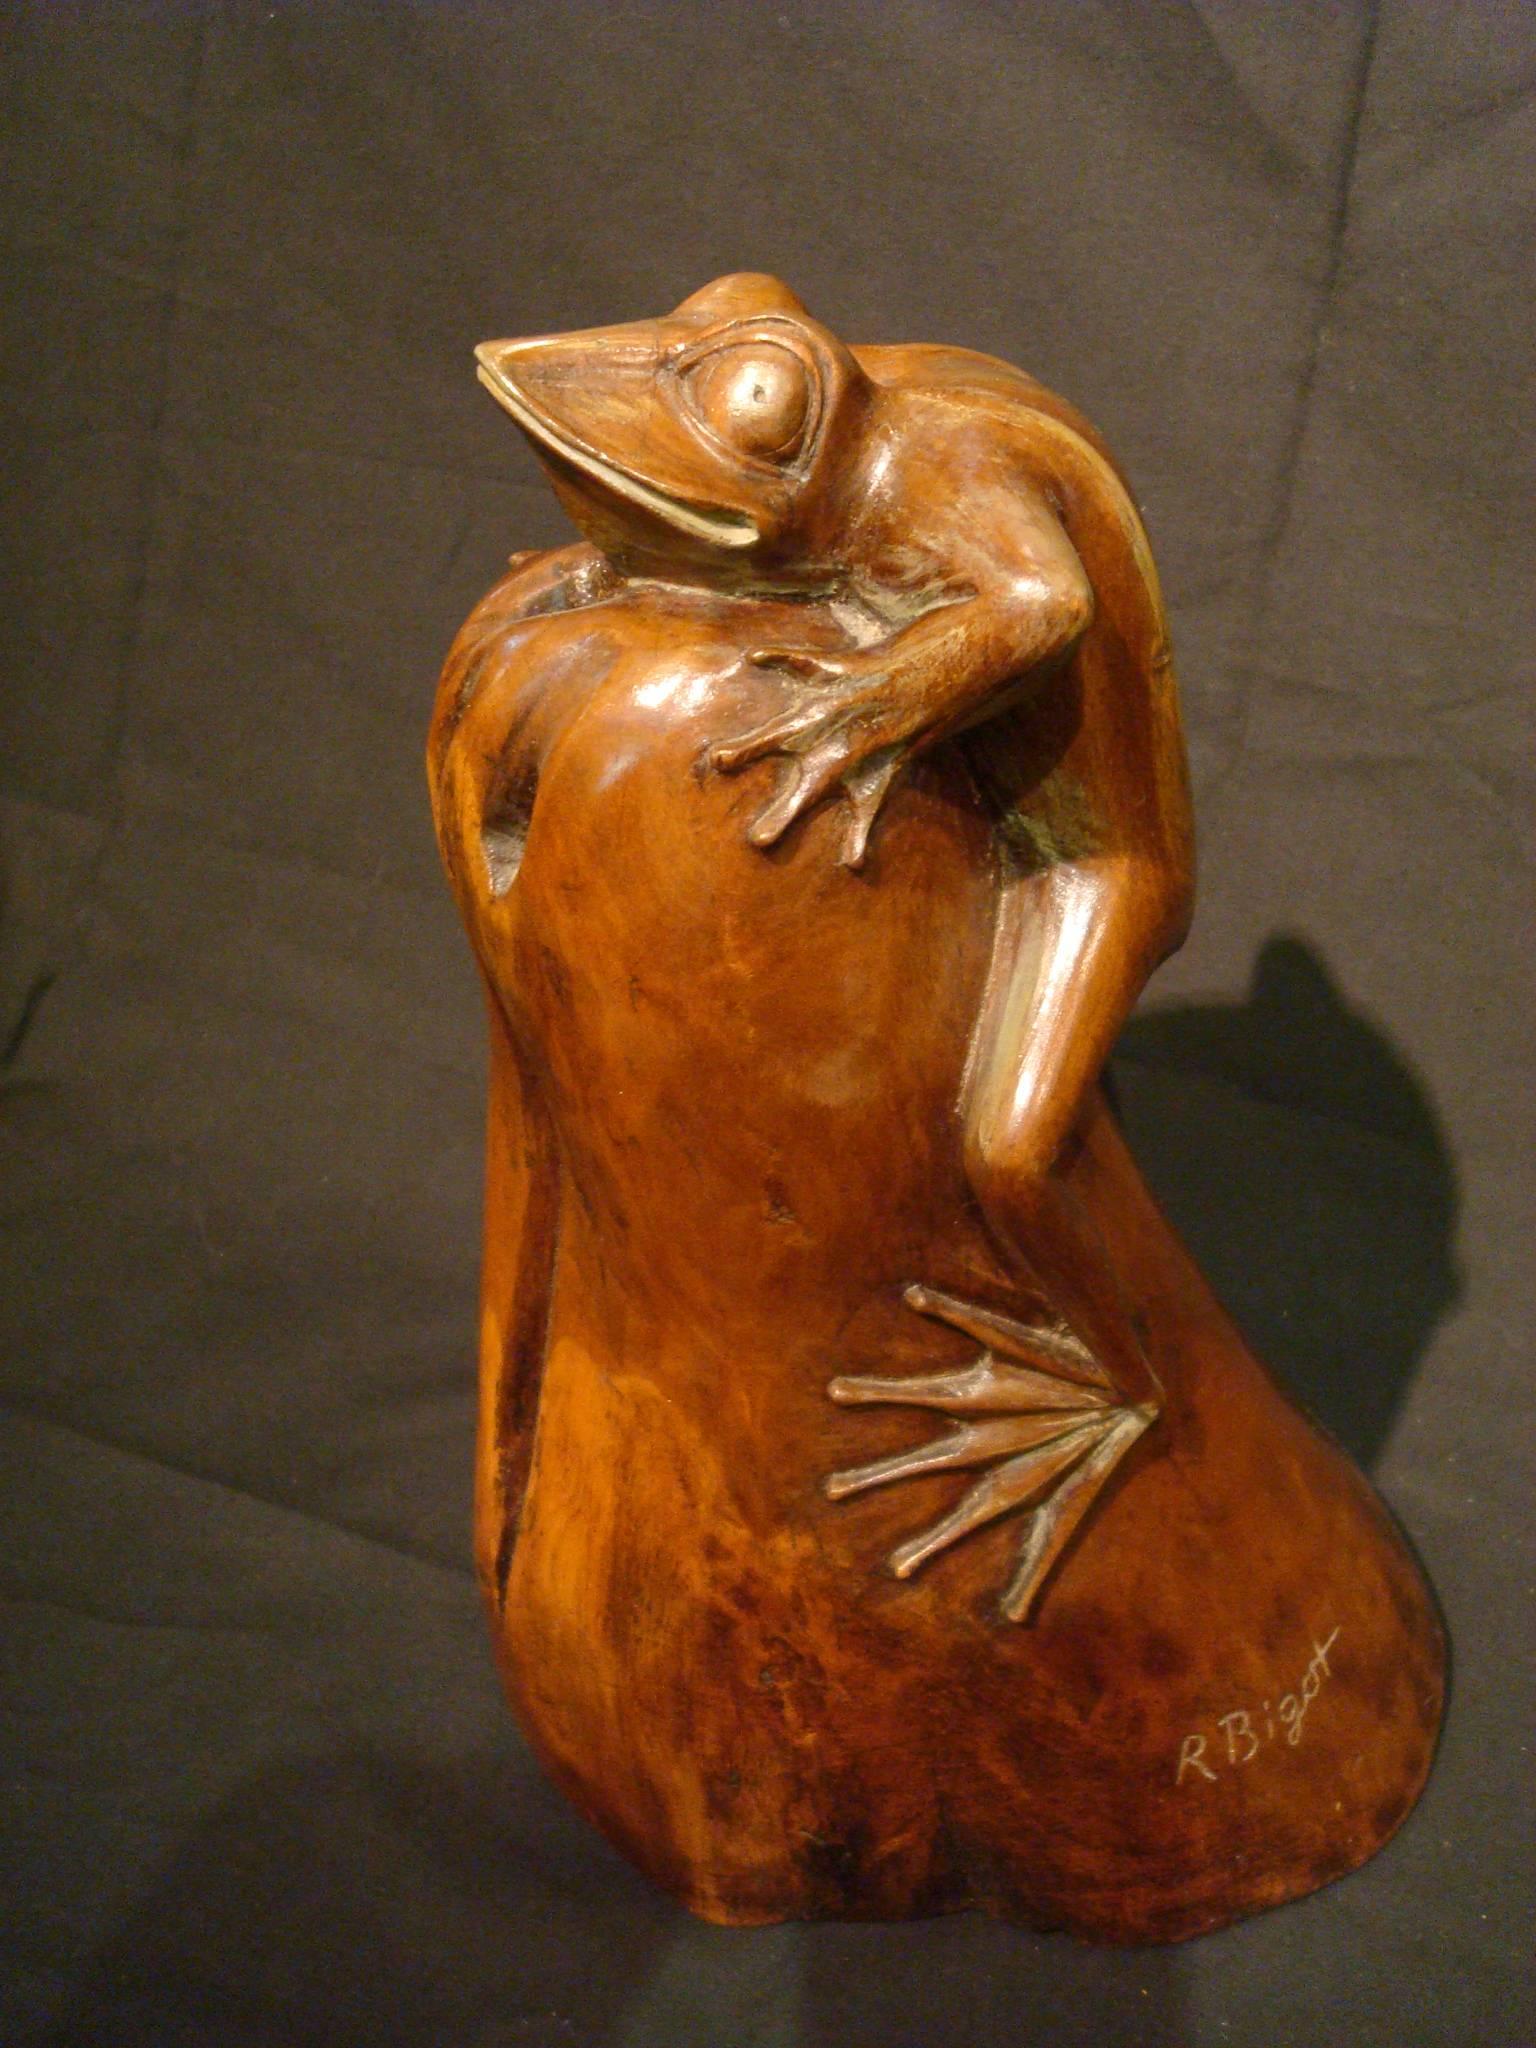 Very nice wooden carved sculpture of a frog over a stone. The frog has a very comic looking. It is signed R. Bigot, and stamped under it made in France,
French, circa 1920.